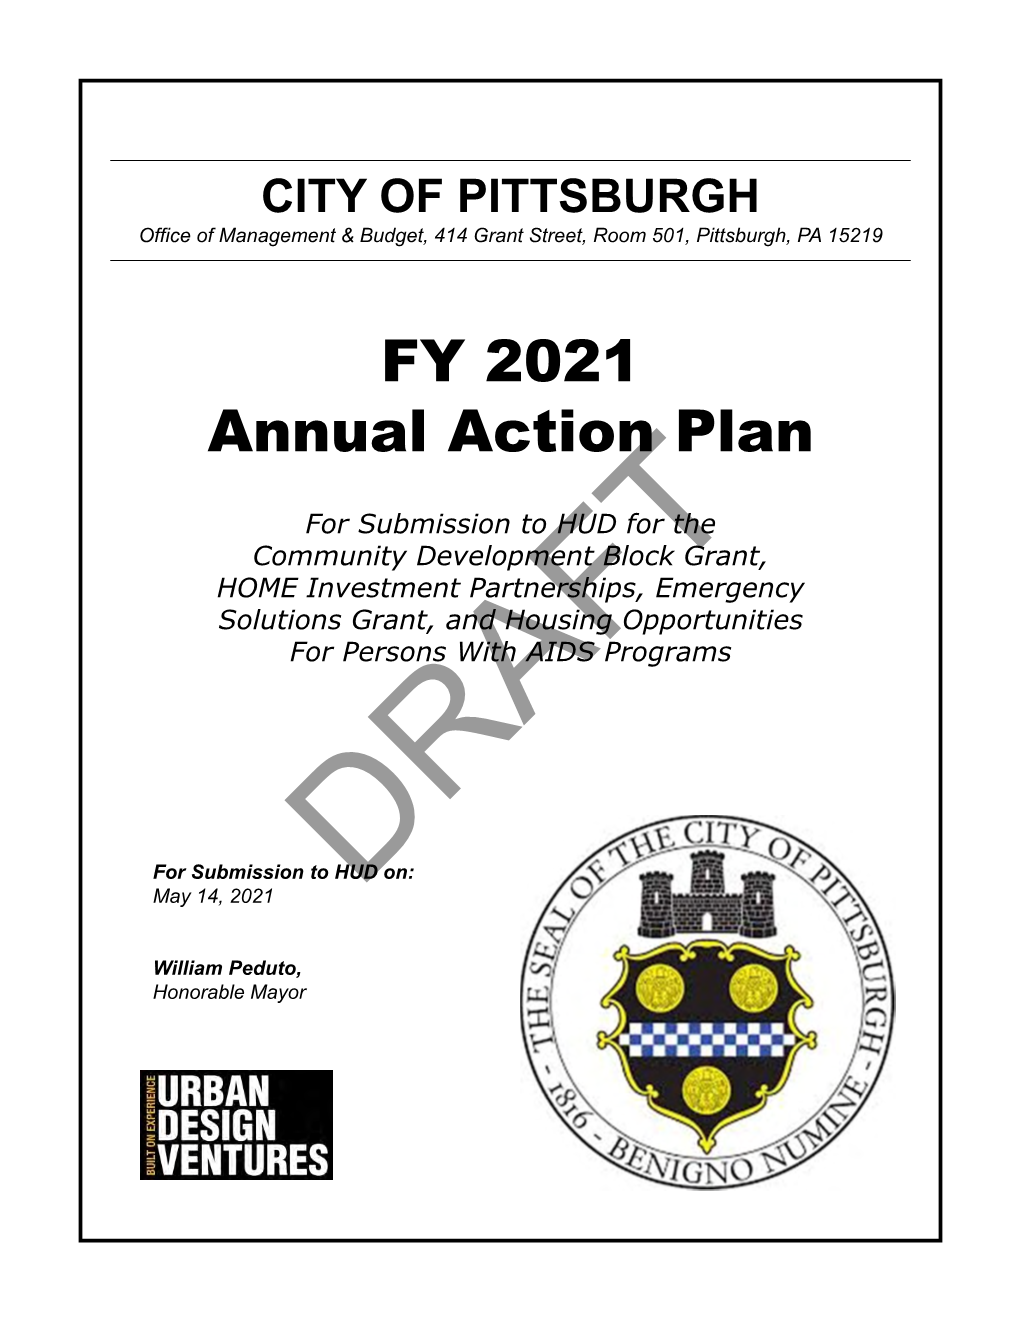 FY 2021 Annual Action Plan